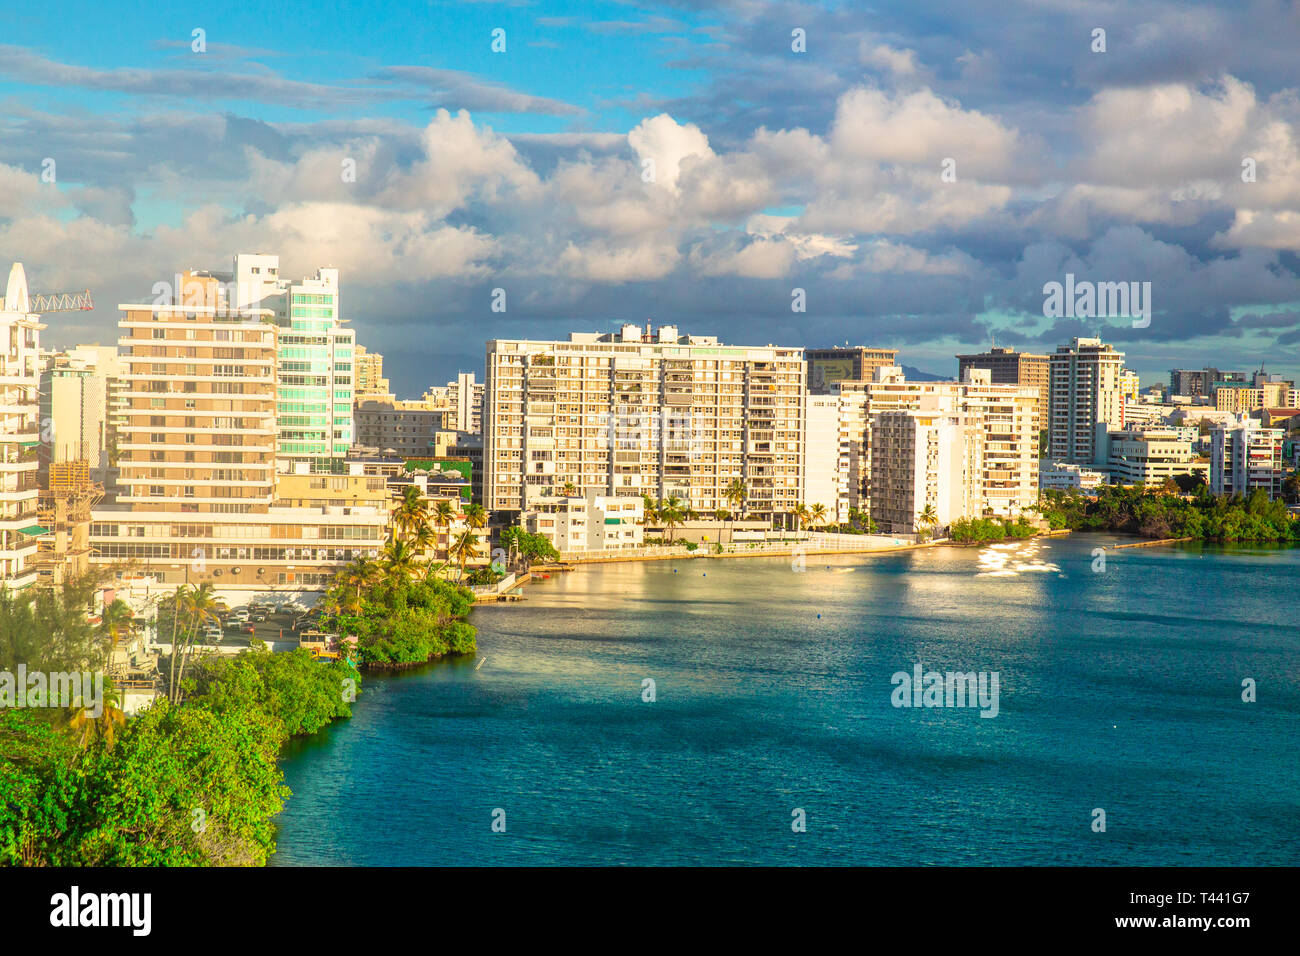 View of Condado area of San Juan Puerto Rico with bay and buildings on a day with clouds and sun Stock Photo